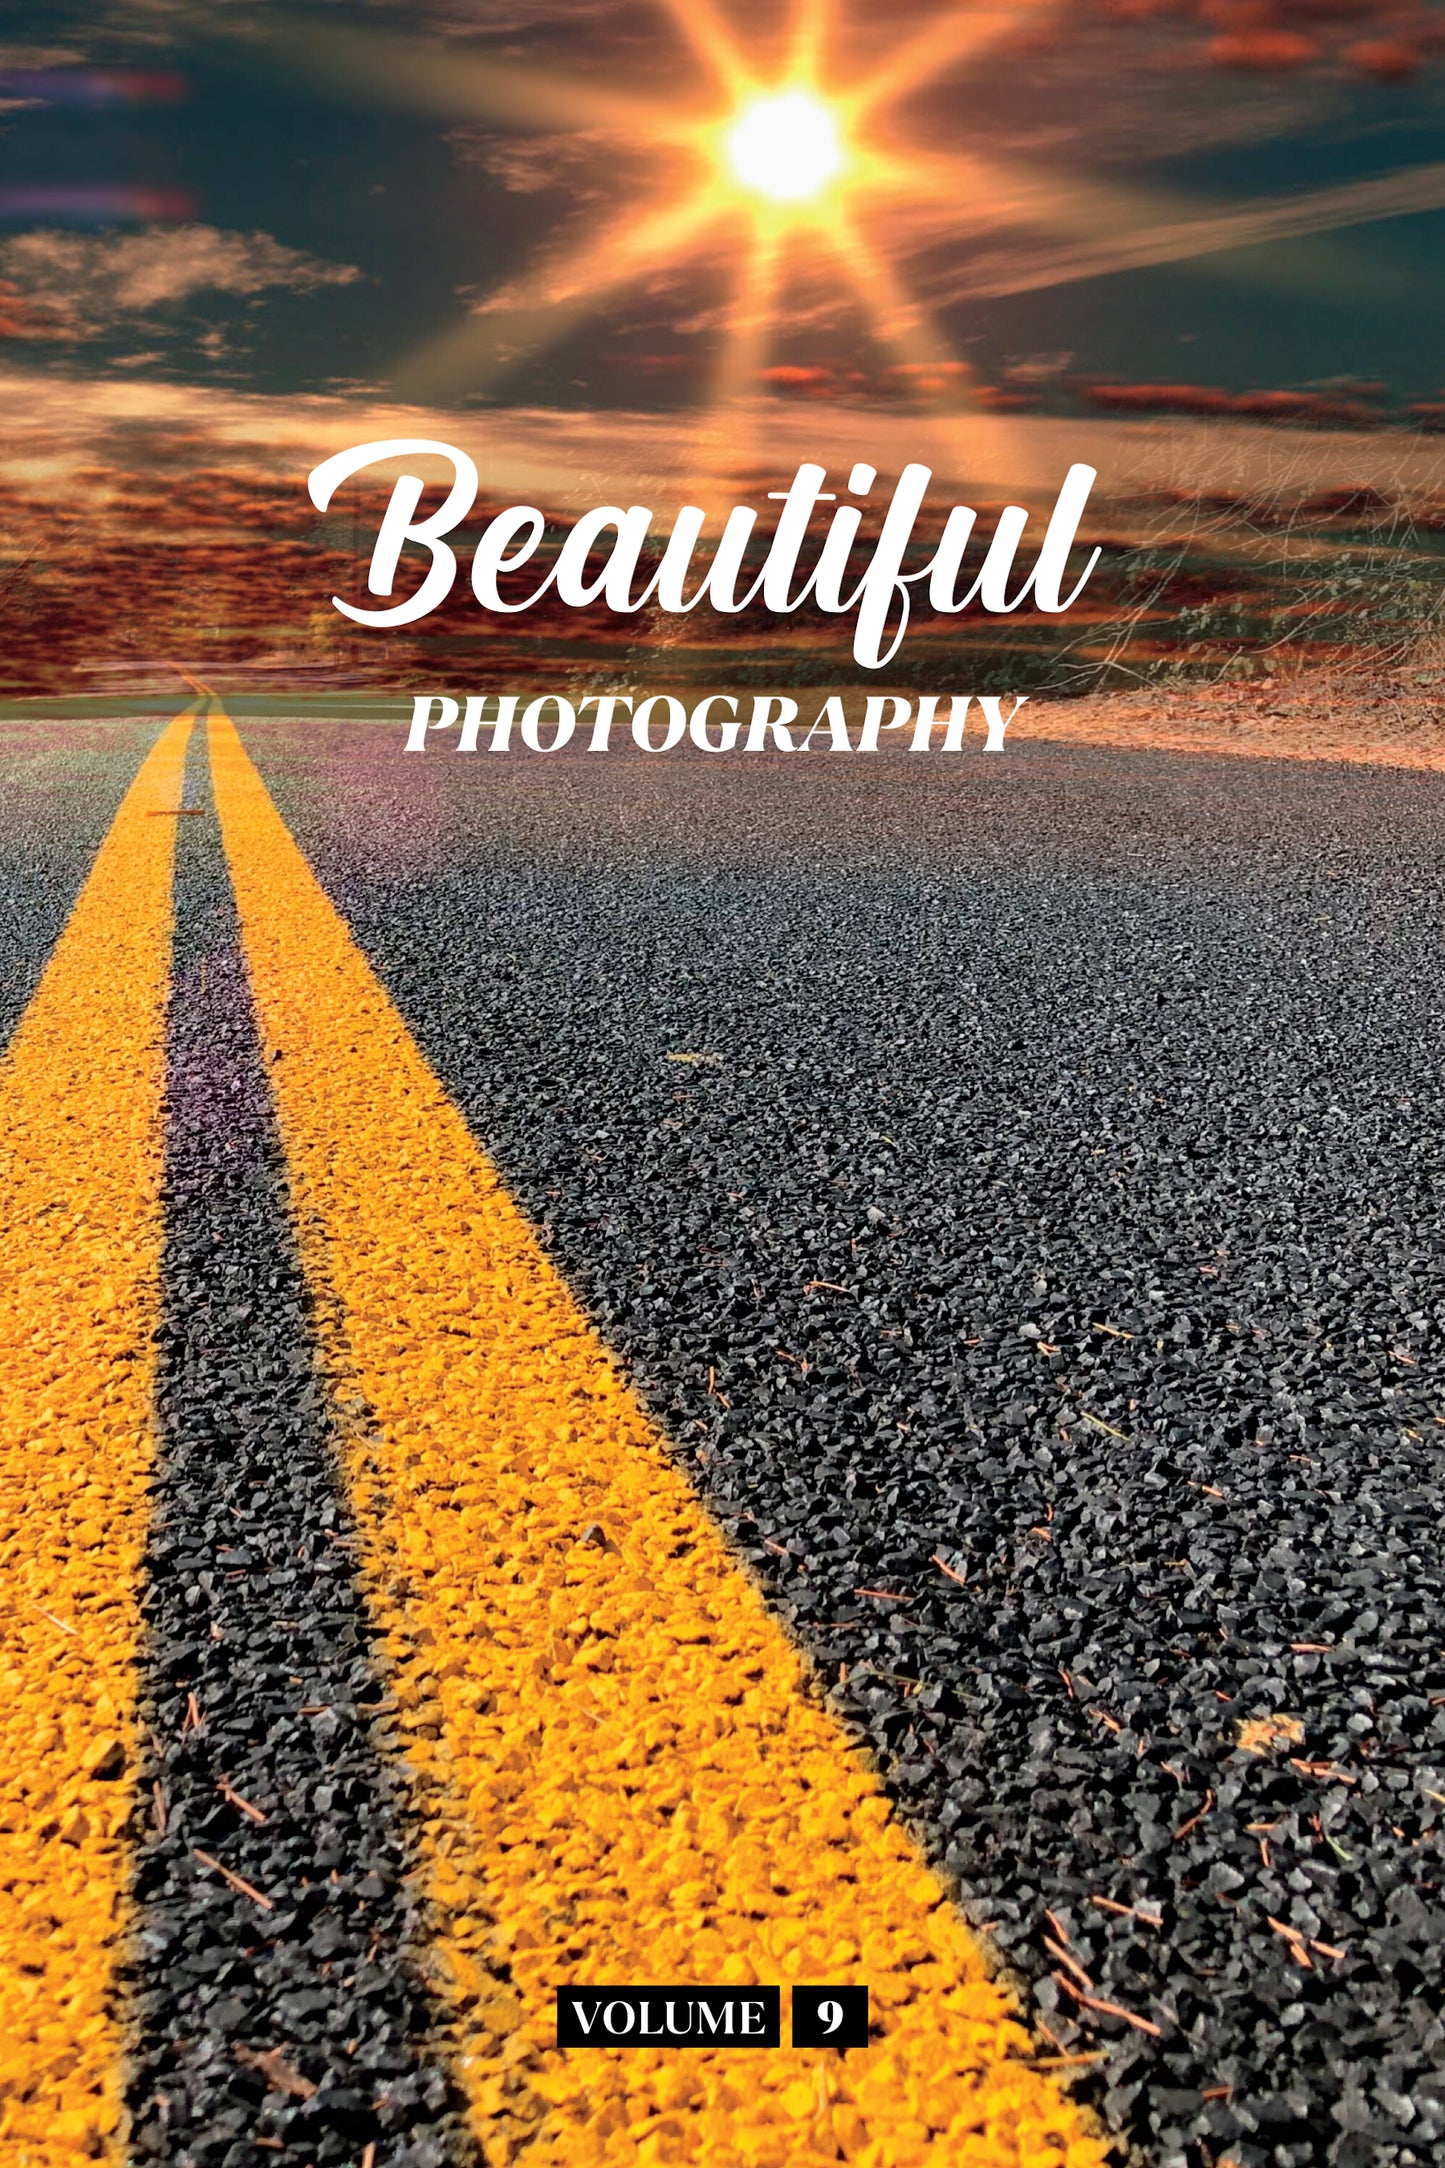 Beautiful Photography Volume 9 (Physical Book)